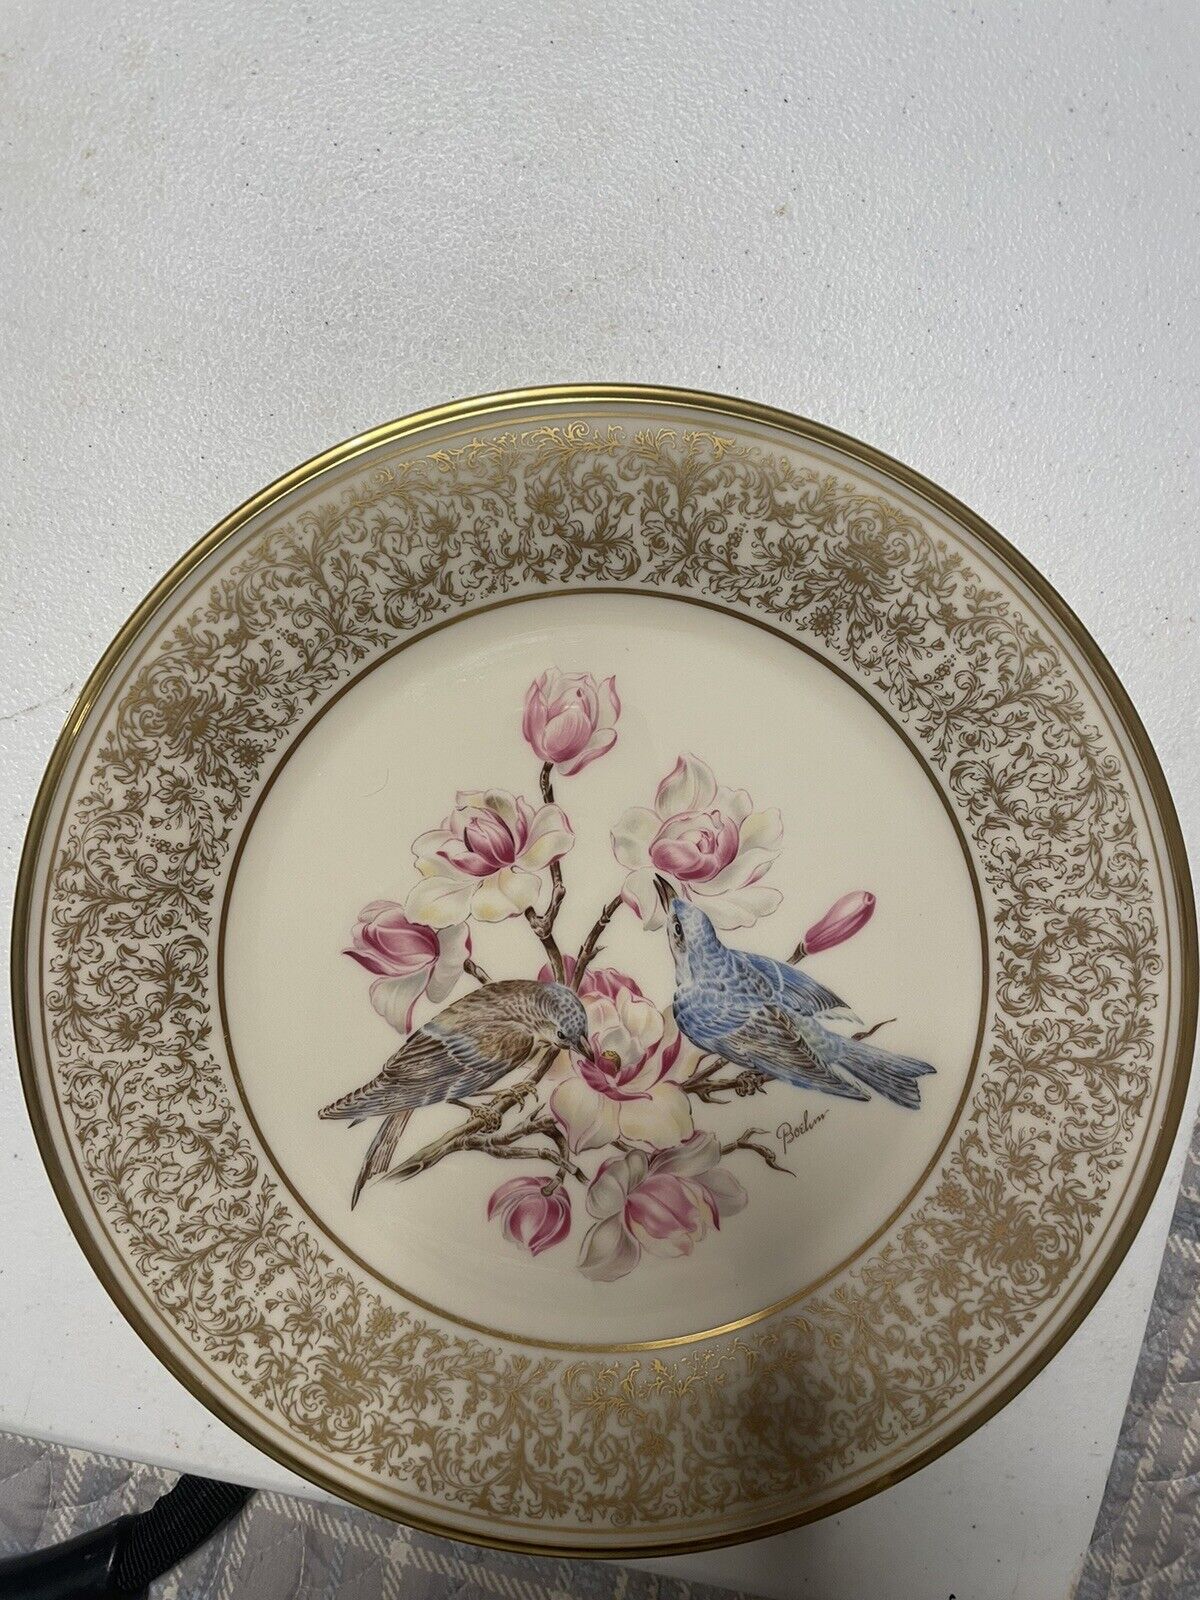 Beautiful Lenox An Annual Limited Edition Of Boehm Birds 10 3/4 1972 Plate